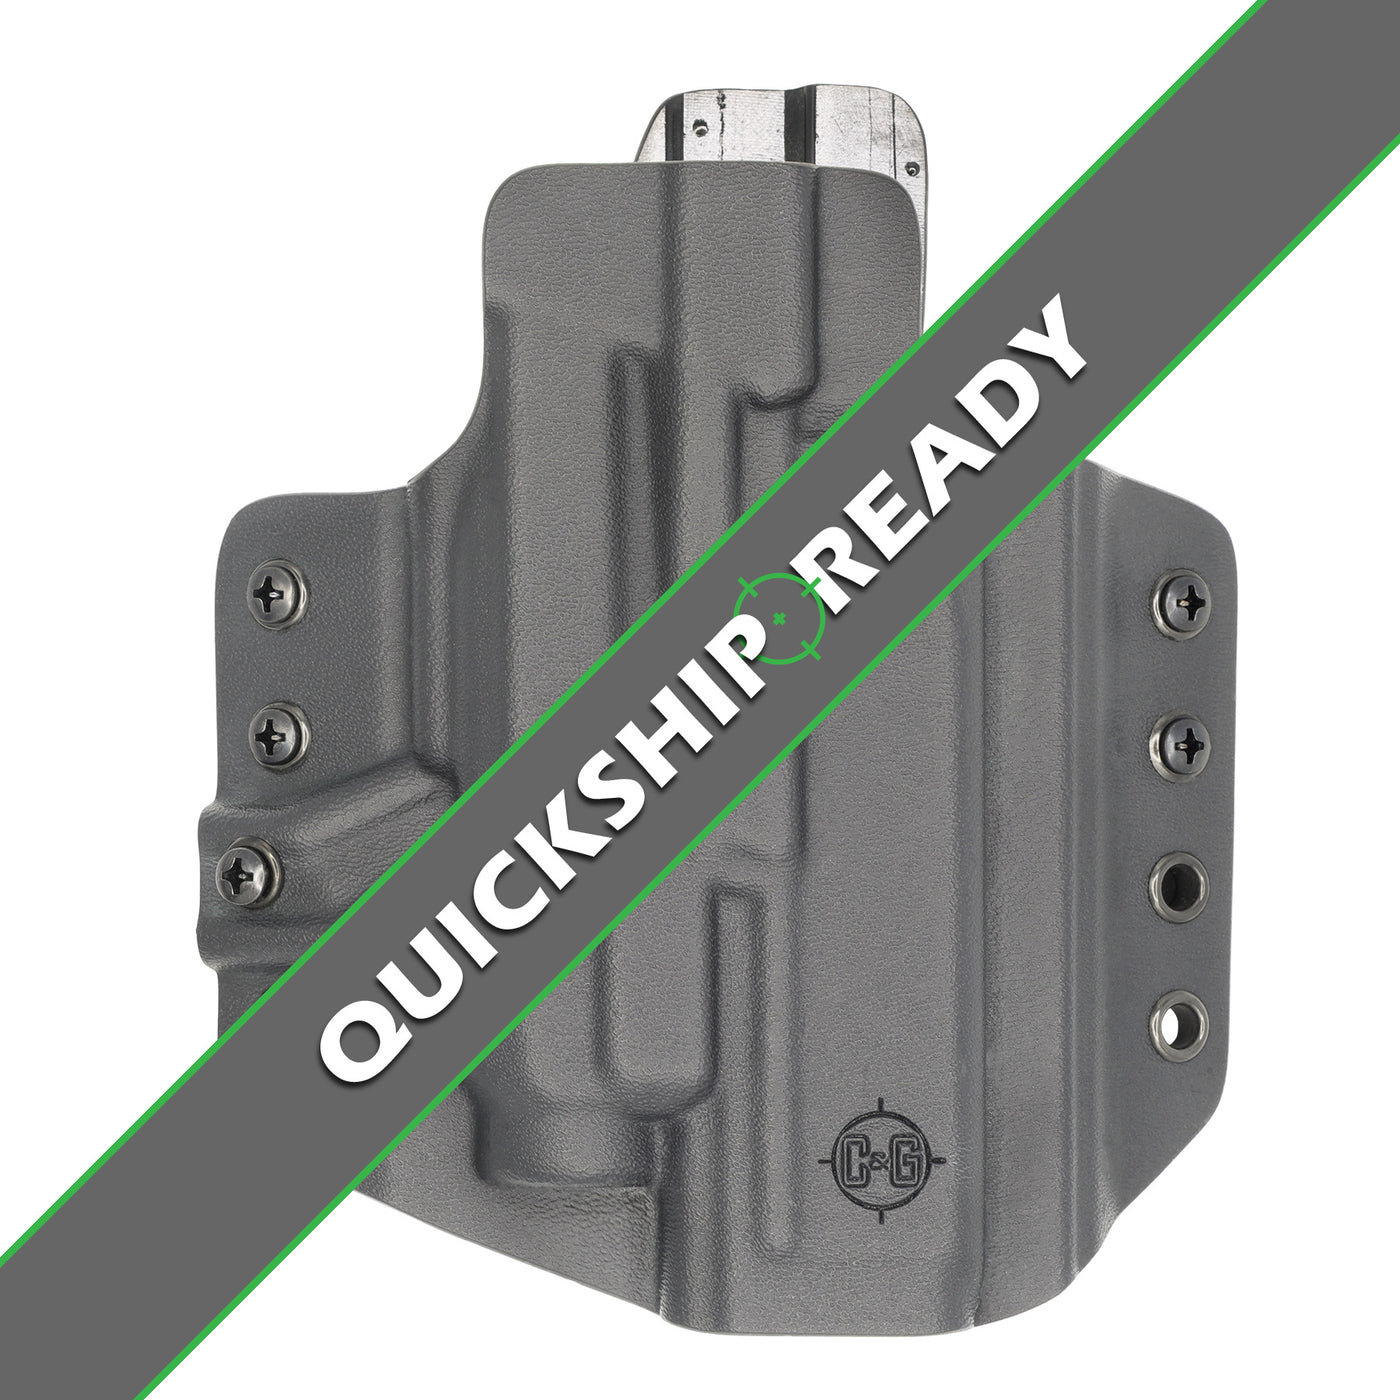 C&G Holsters quickship OWB Tactical Glock 20/21 streamlight TLR7/a